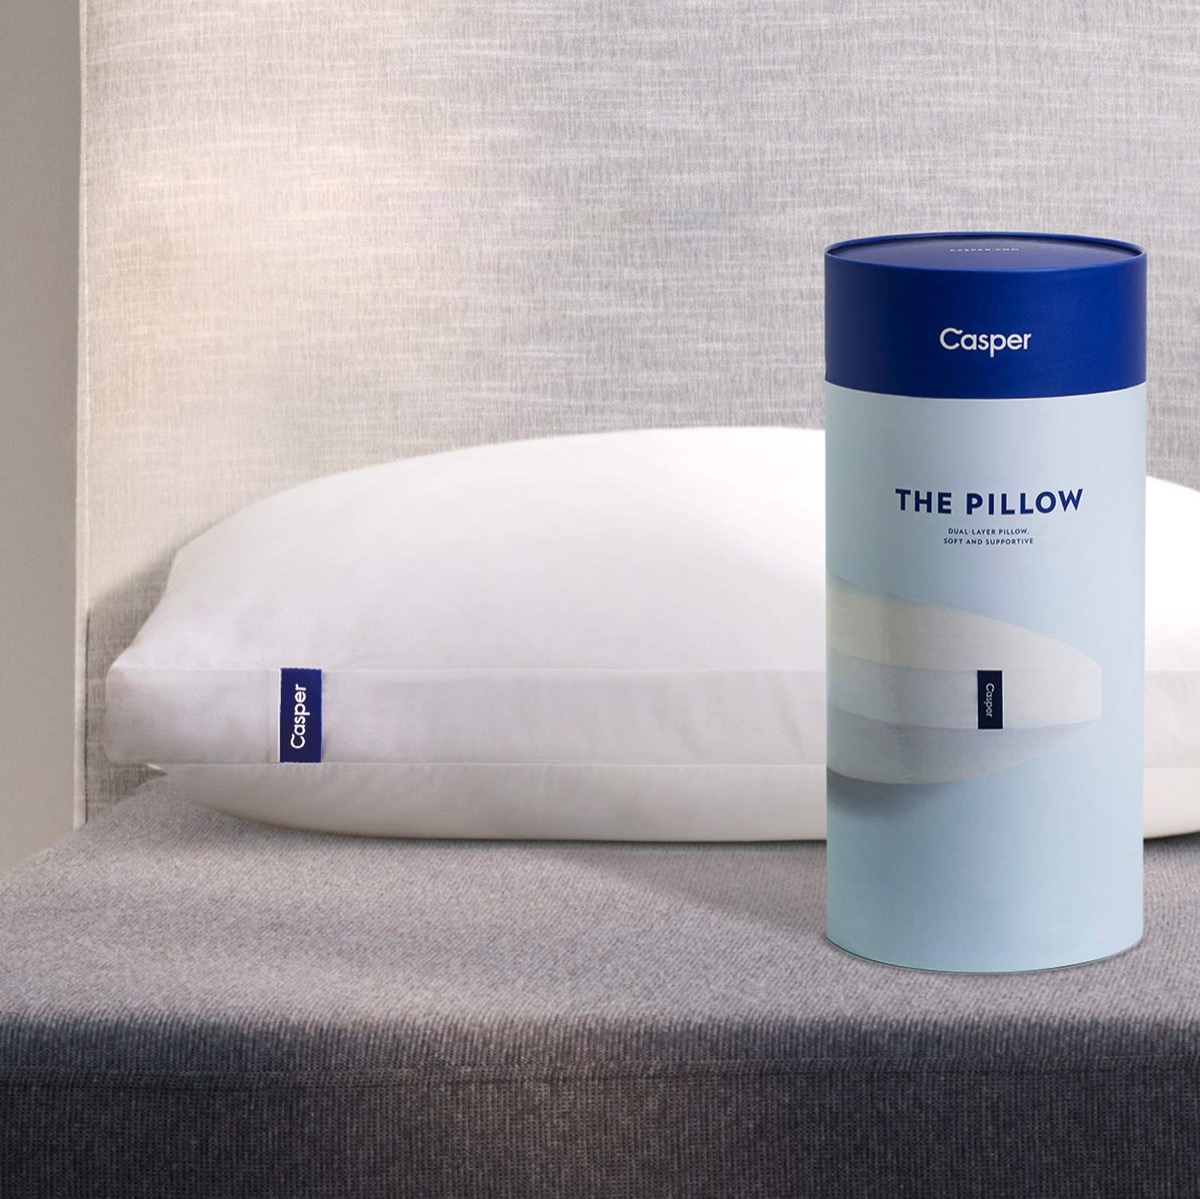 white casper pillow and blue cylindrical case next to it